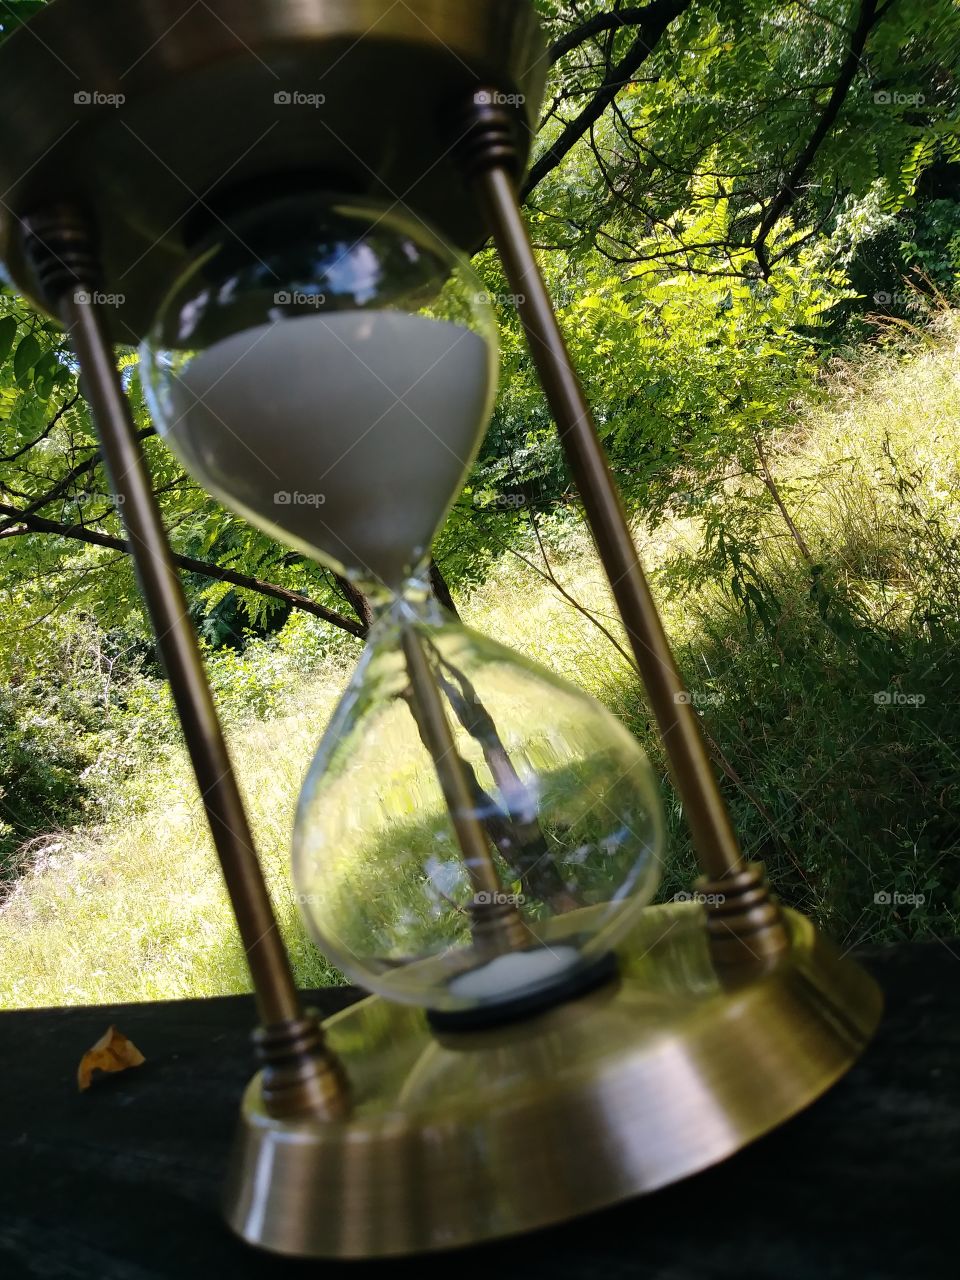 A golden hourglass set in nature.